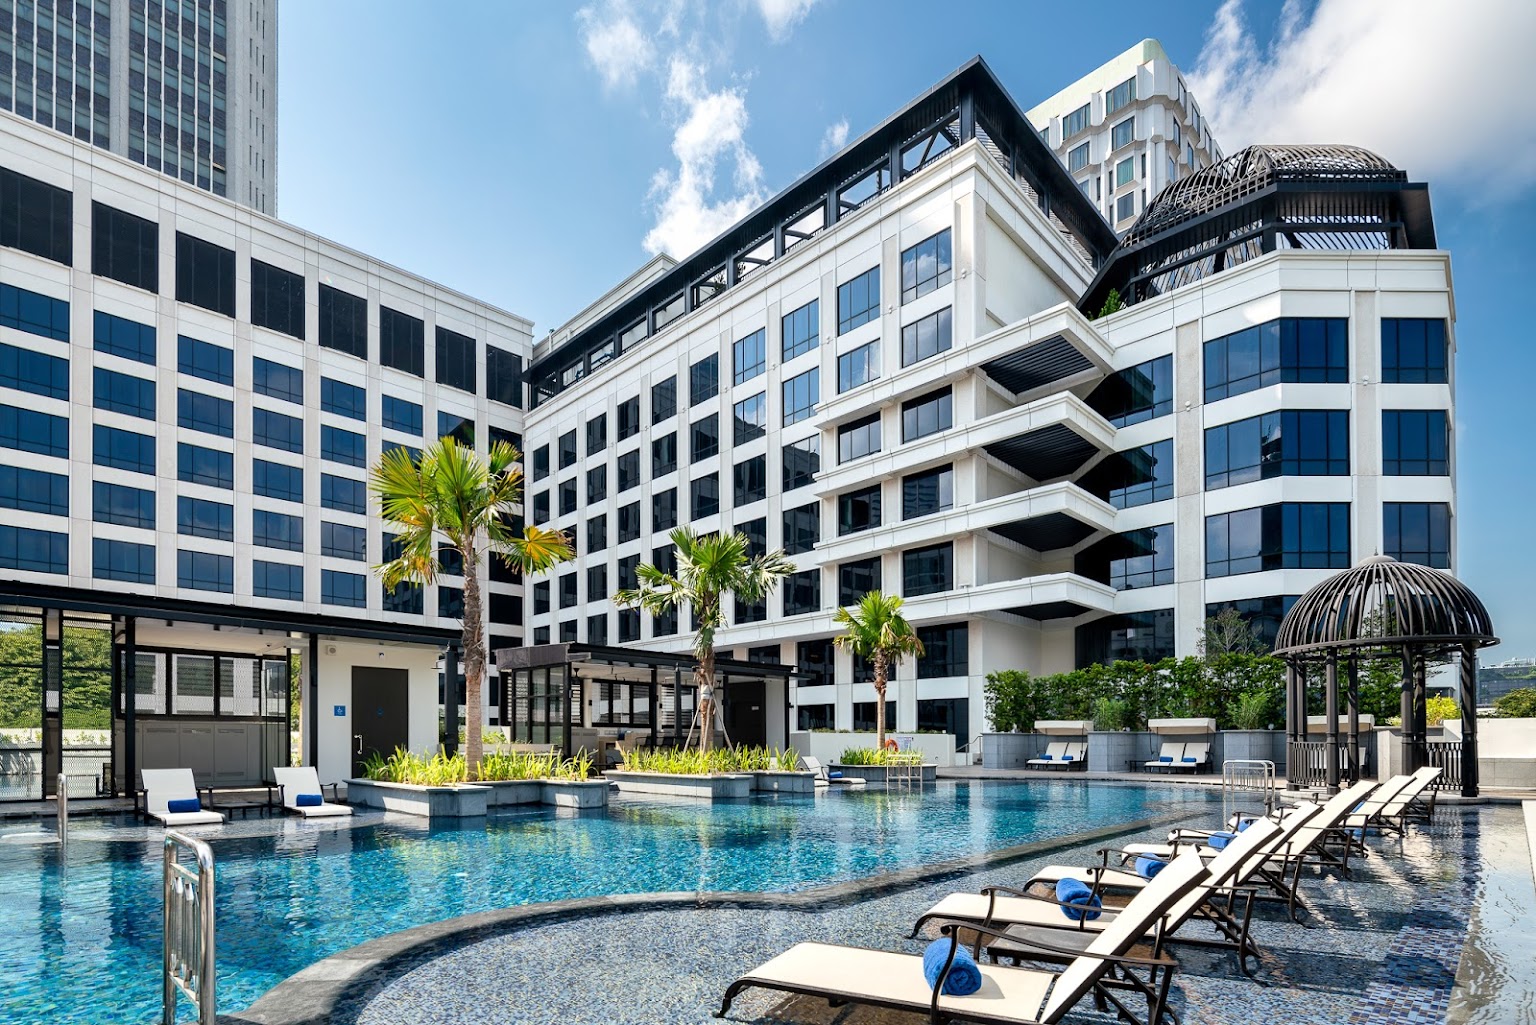 Grand Park City Hall Hotel Singapore for Quarantine Order in October 2021